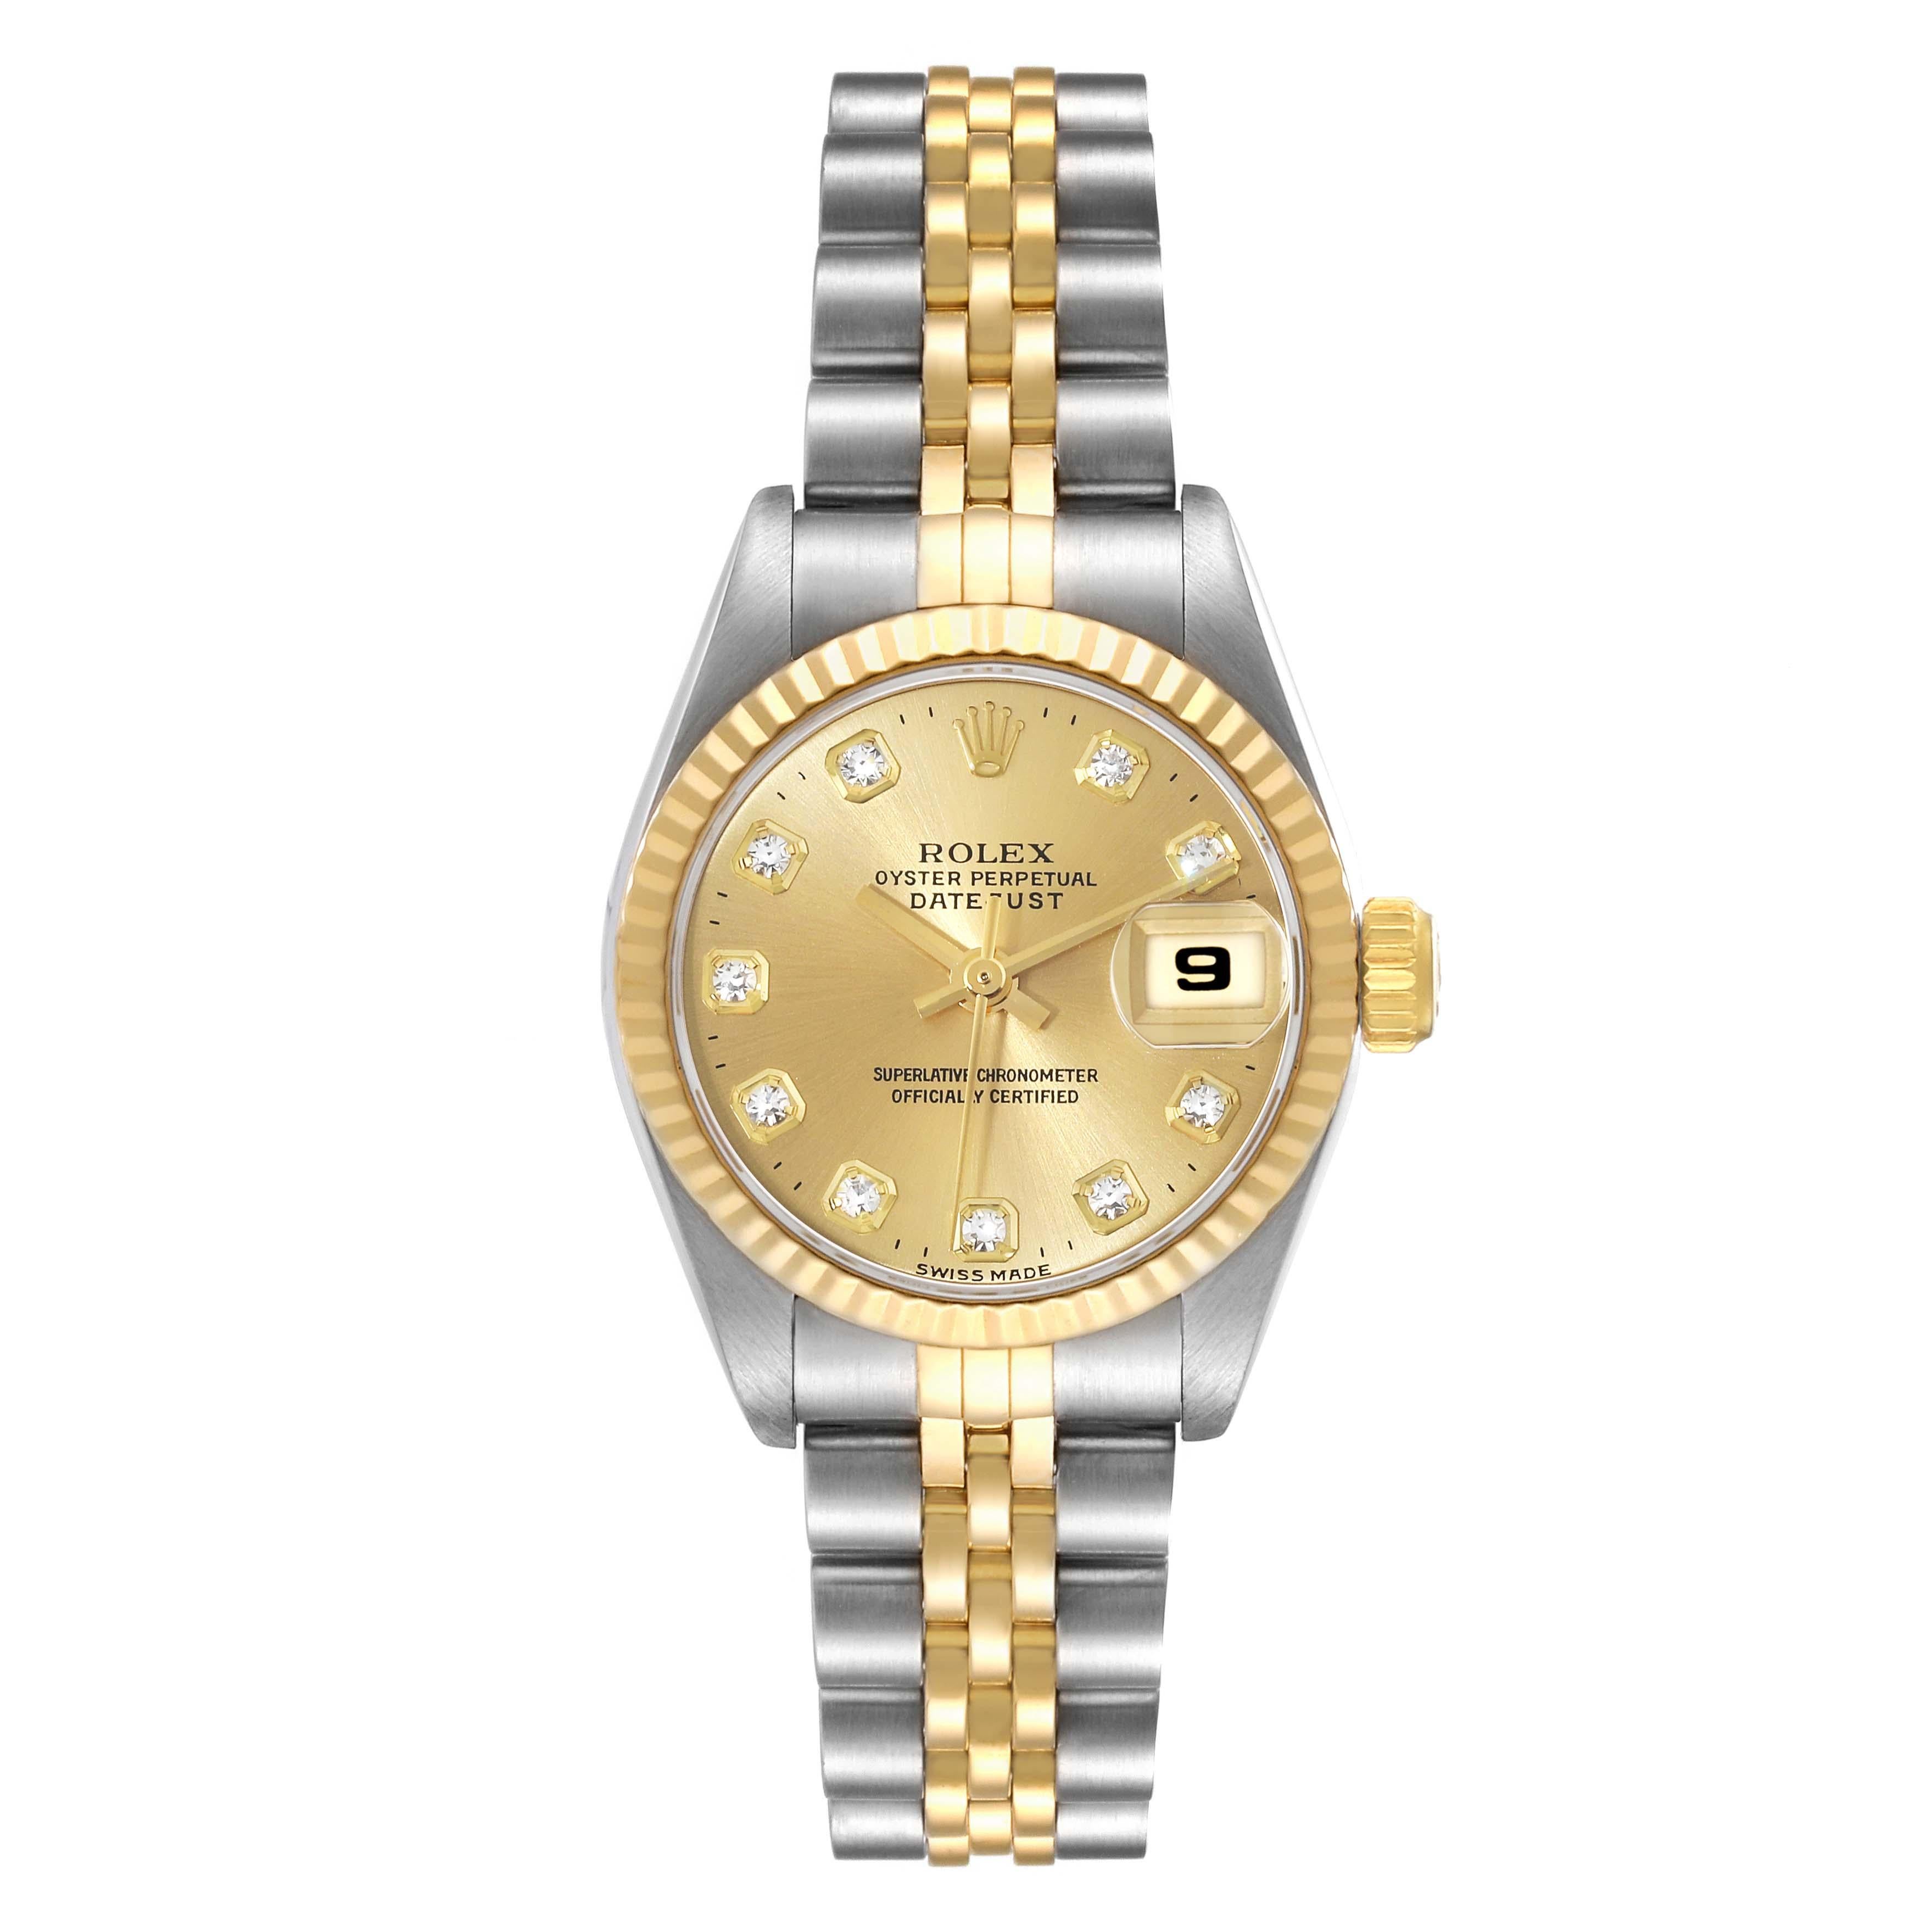 Rolex Datejust Steel Yellow Gold Diamond Dial Ladies Watch 69173. Officially certified chronometer automatic self-winding movement. Stainless steel oyster case 26.0 mm in diameter. Rolex logo on the crown. 18k yellow gold fluted bezel. Scratch